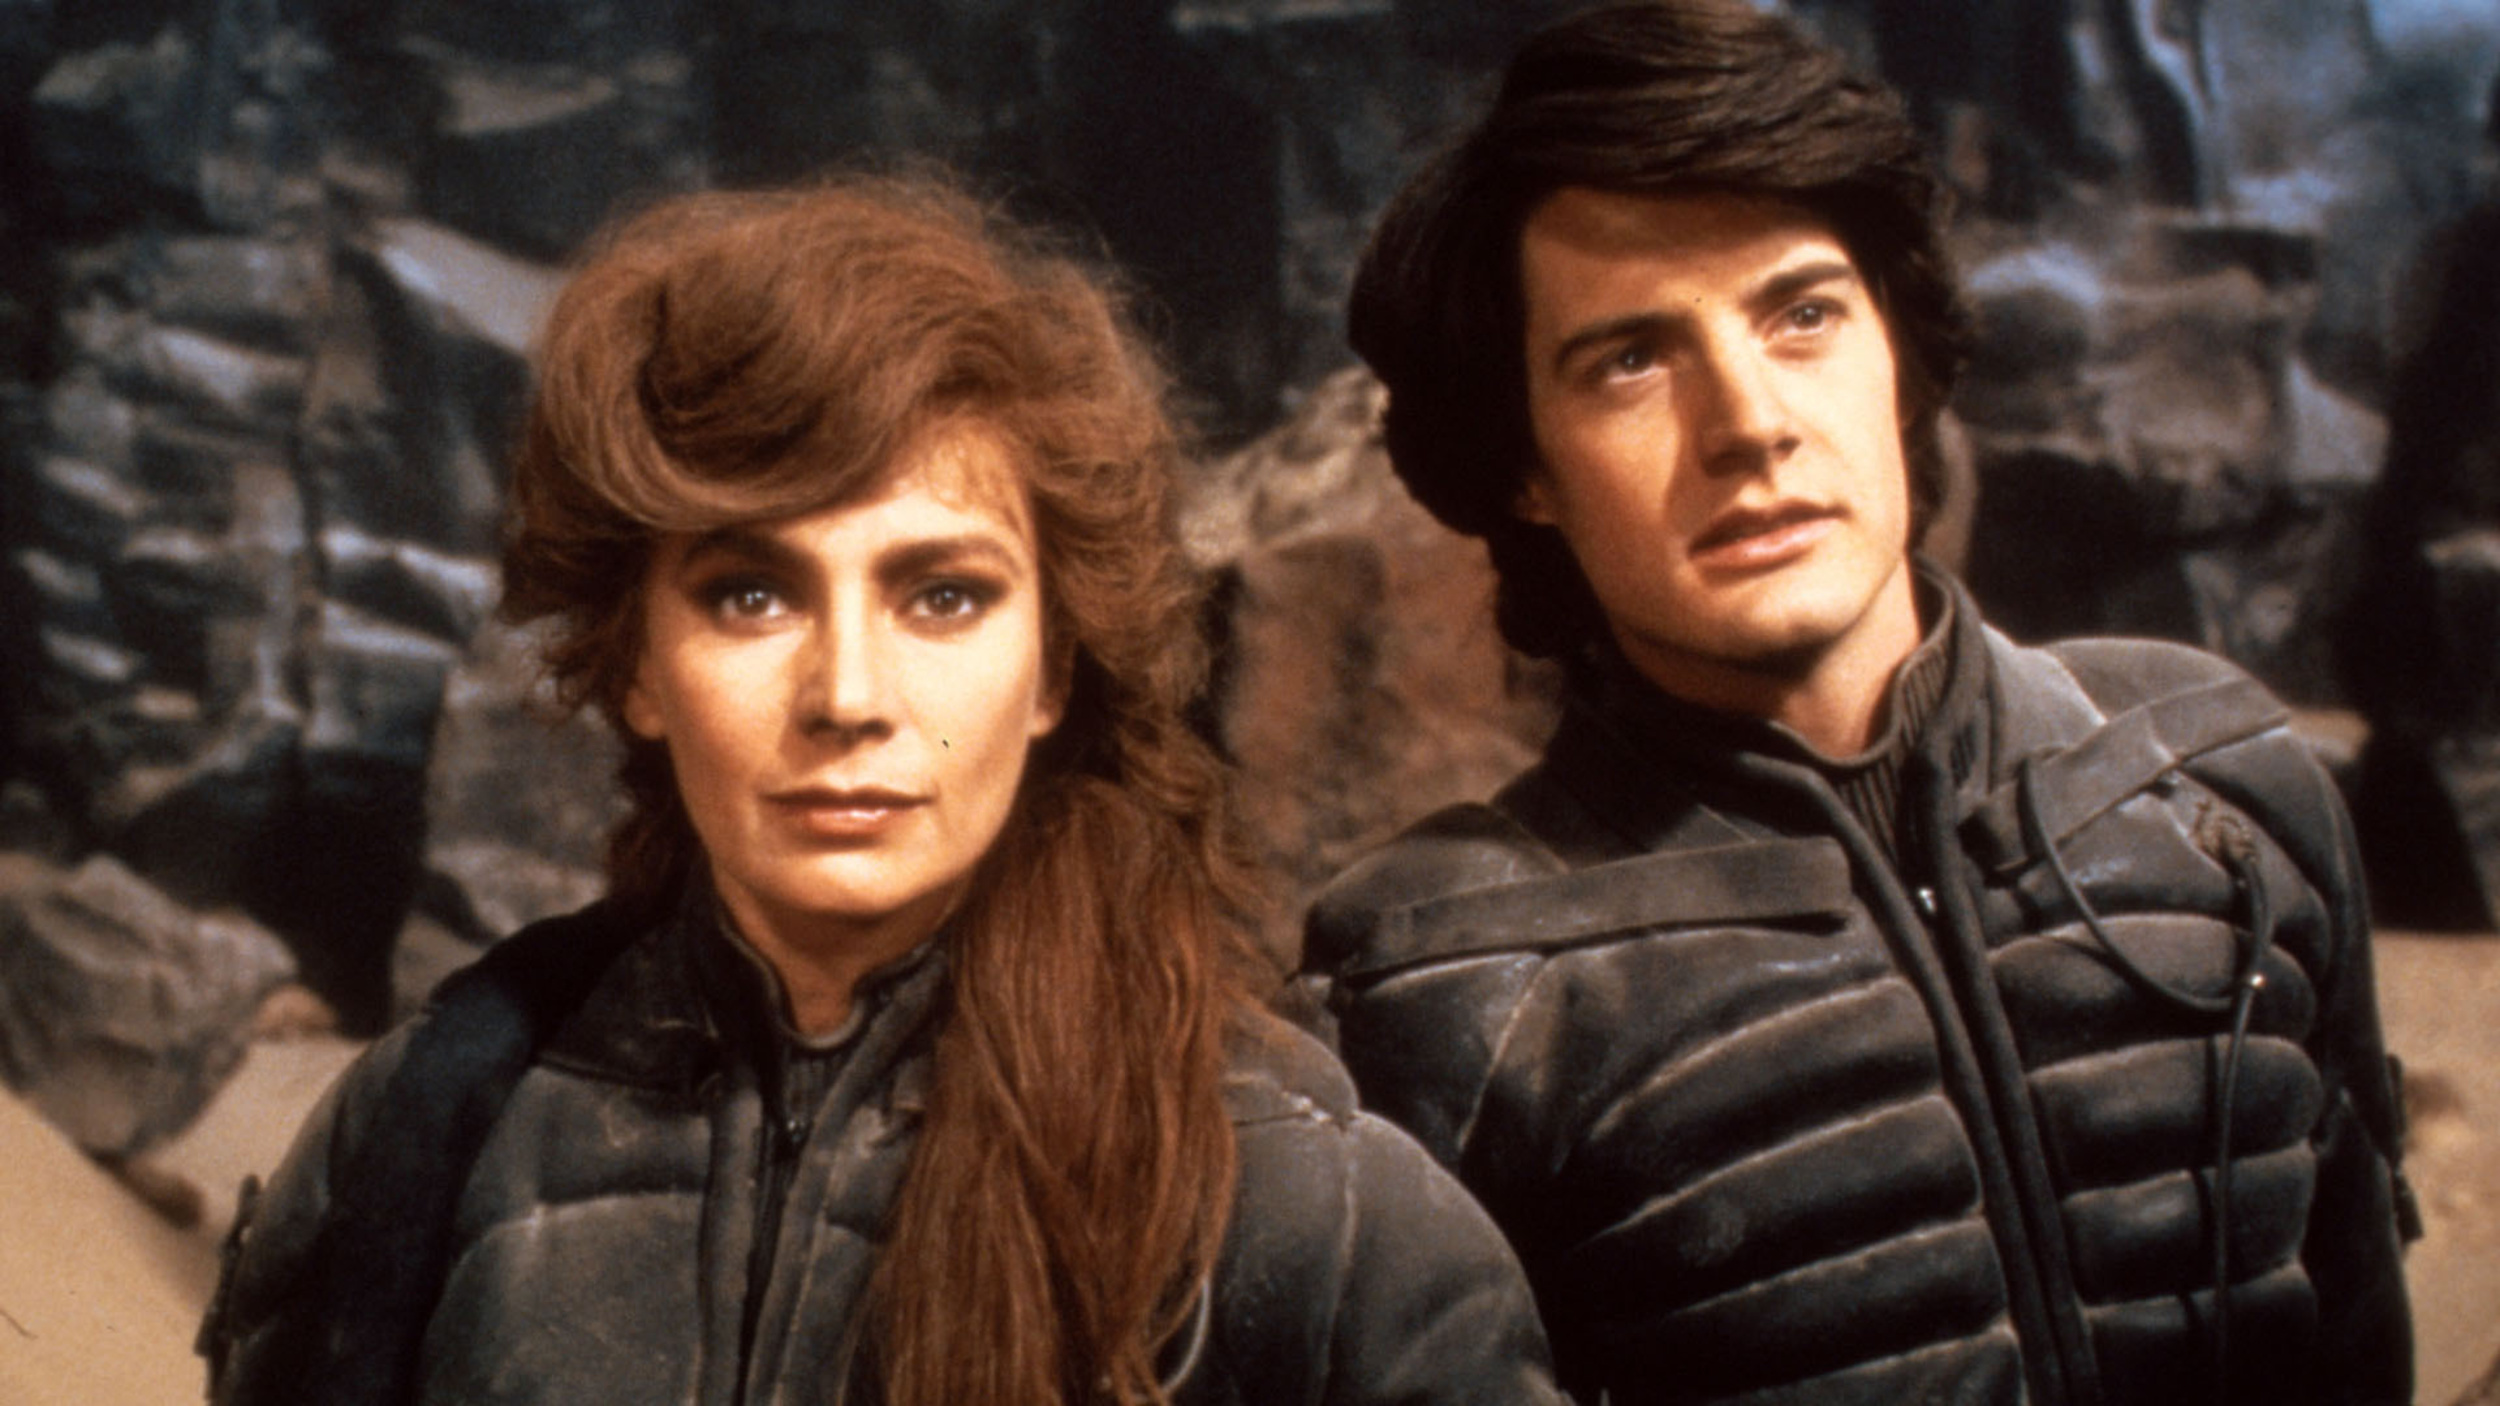 <p>Frank Herbert’s “Dune” is an insane novel, which is part of why it has become a sci-fi classic. Fans of sci-fi and fantasy tend to be REALLY into their genres. David Lynch, a straight-up weirdo in his own right, seemed like a good fit to try and turn the book into a movie. It…didn’t work, though it was interesting in its ambition. The film was a flop, but at least Sting was in it. Now, Denis Villenueve has managed to do a successful job with "Dune," though he had to break it into two films.</p><p>You may also like: <a href='https://www.yardbarker.com/entertainment/articles/sitcom_actors_who_became_dramatic_stars/s1__33741728'>Sitcom actors who became dramatic stars</a></p>